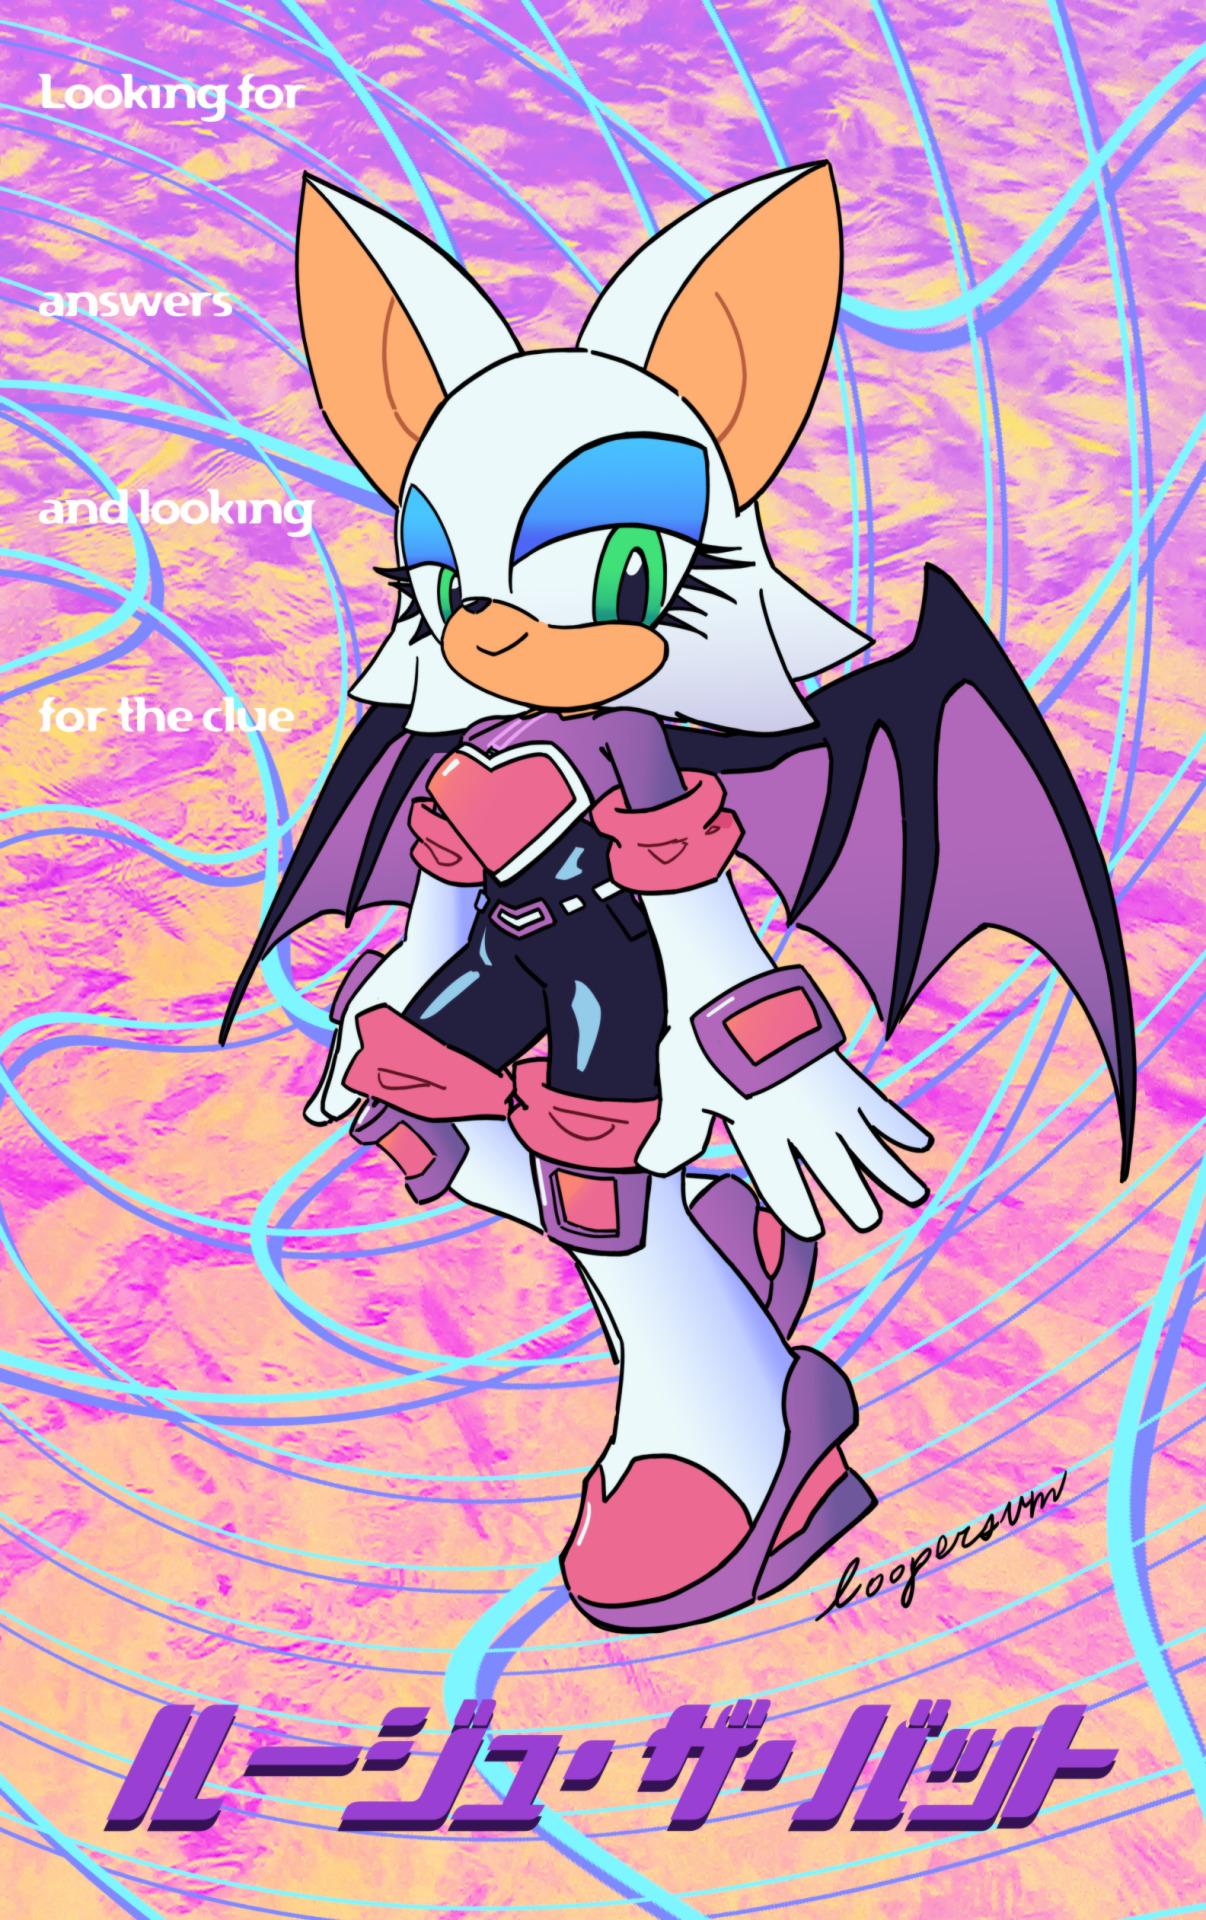 My take on a Sonic Movie Rouge #sonic movie#sonic #sonic the hedgehog #rouge #rouge the bat #sonic adventure#sonic heroes#fanart